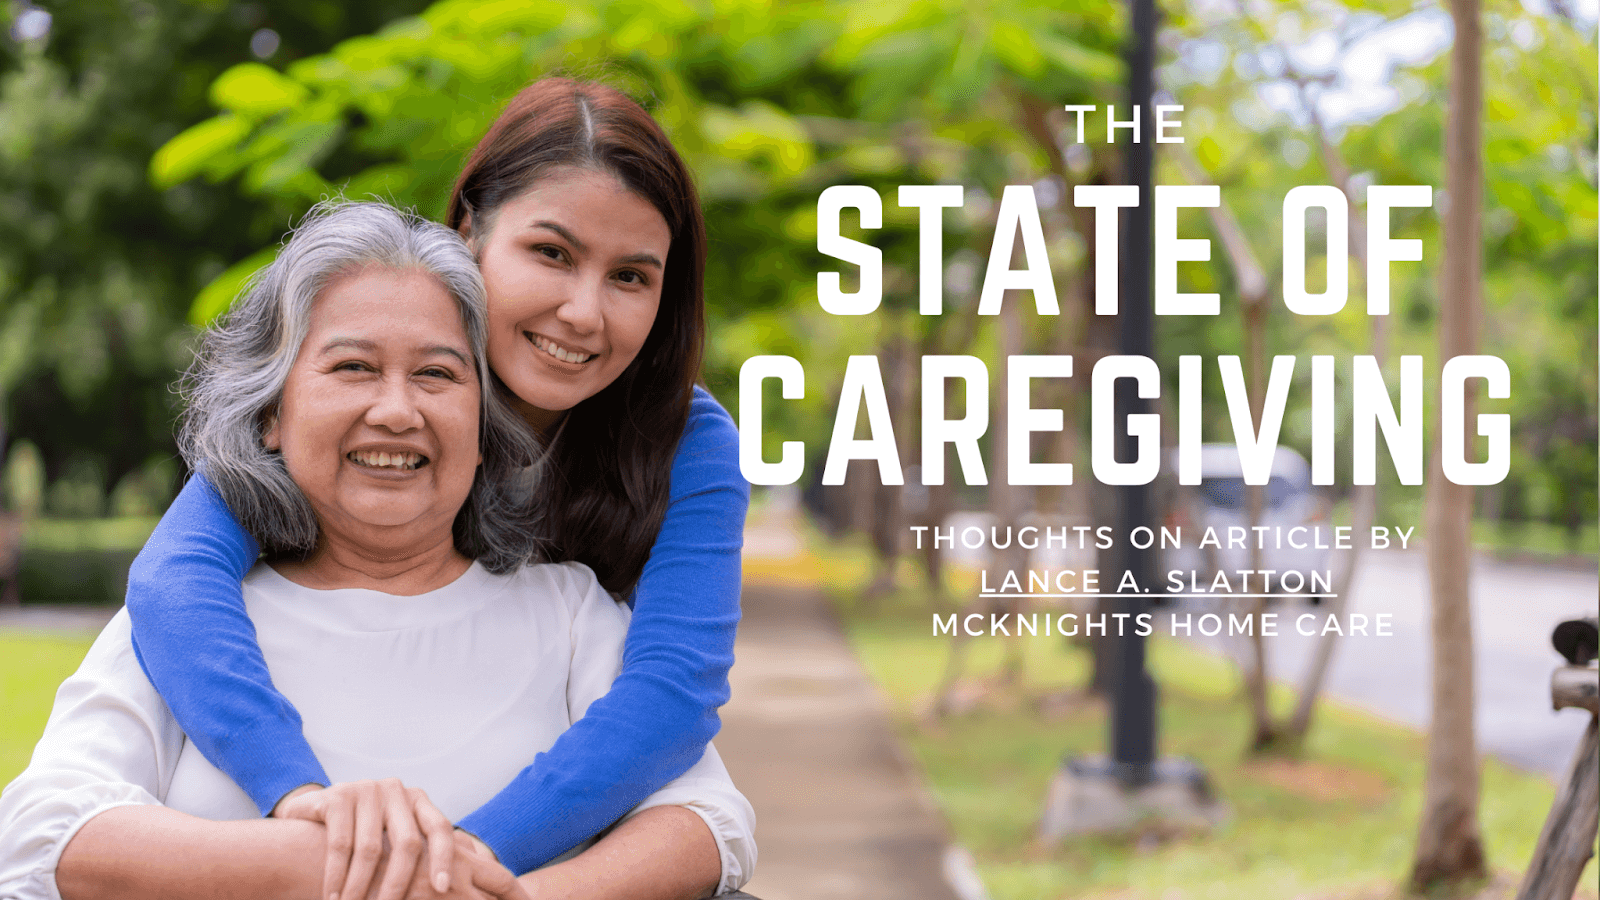 The State of Caregiving